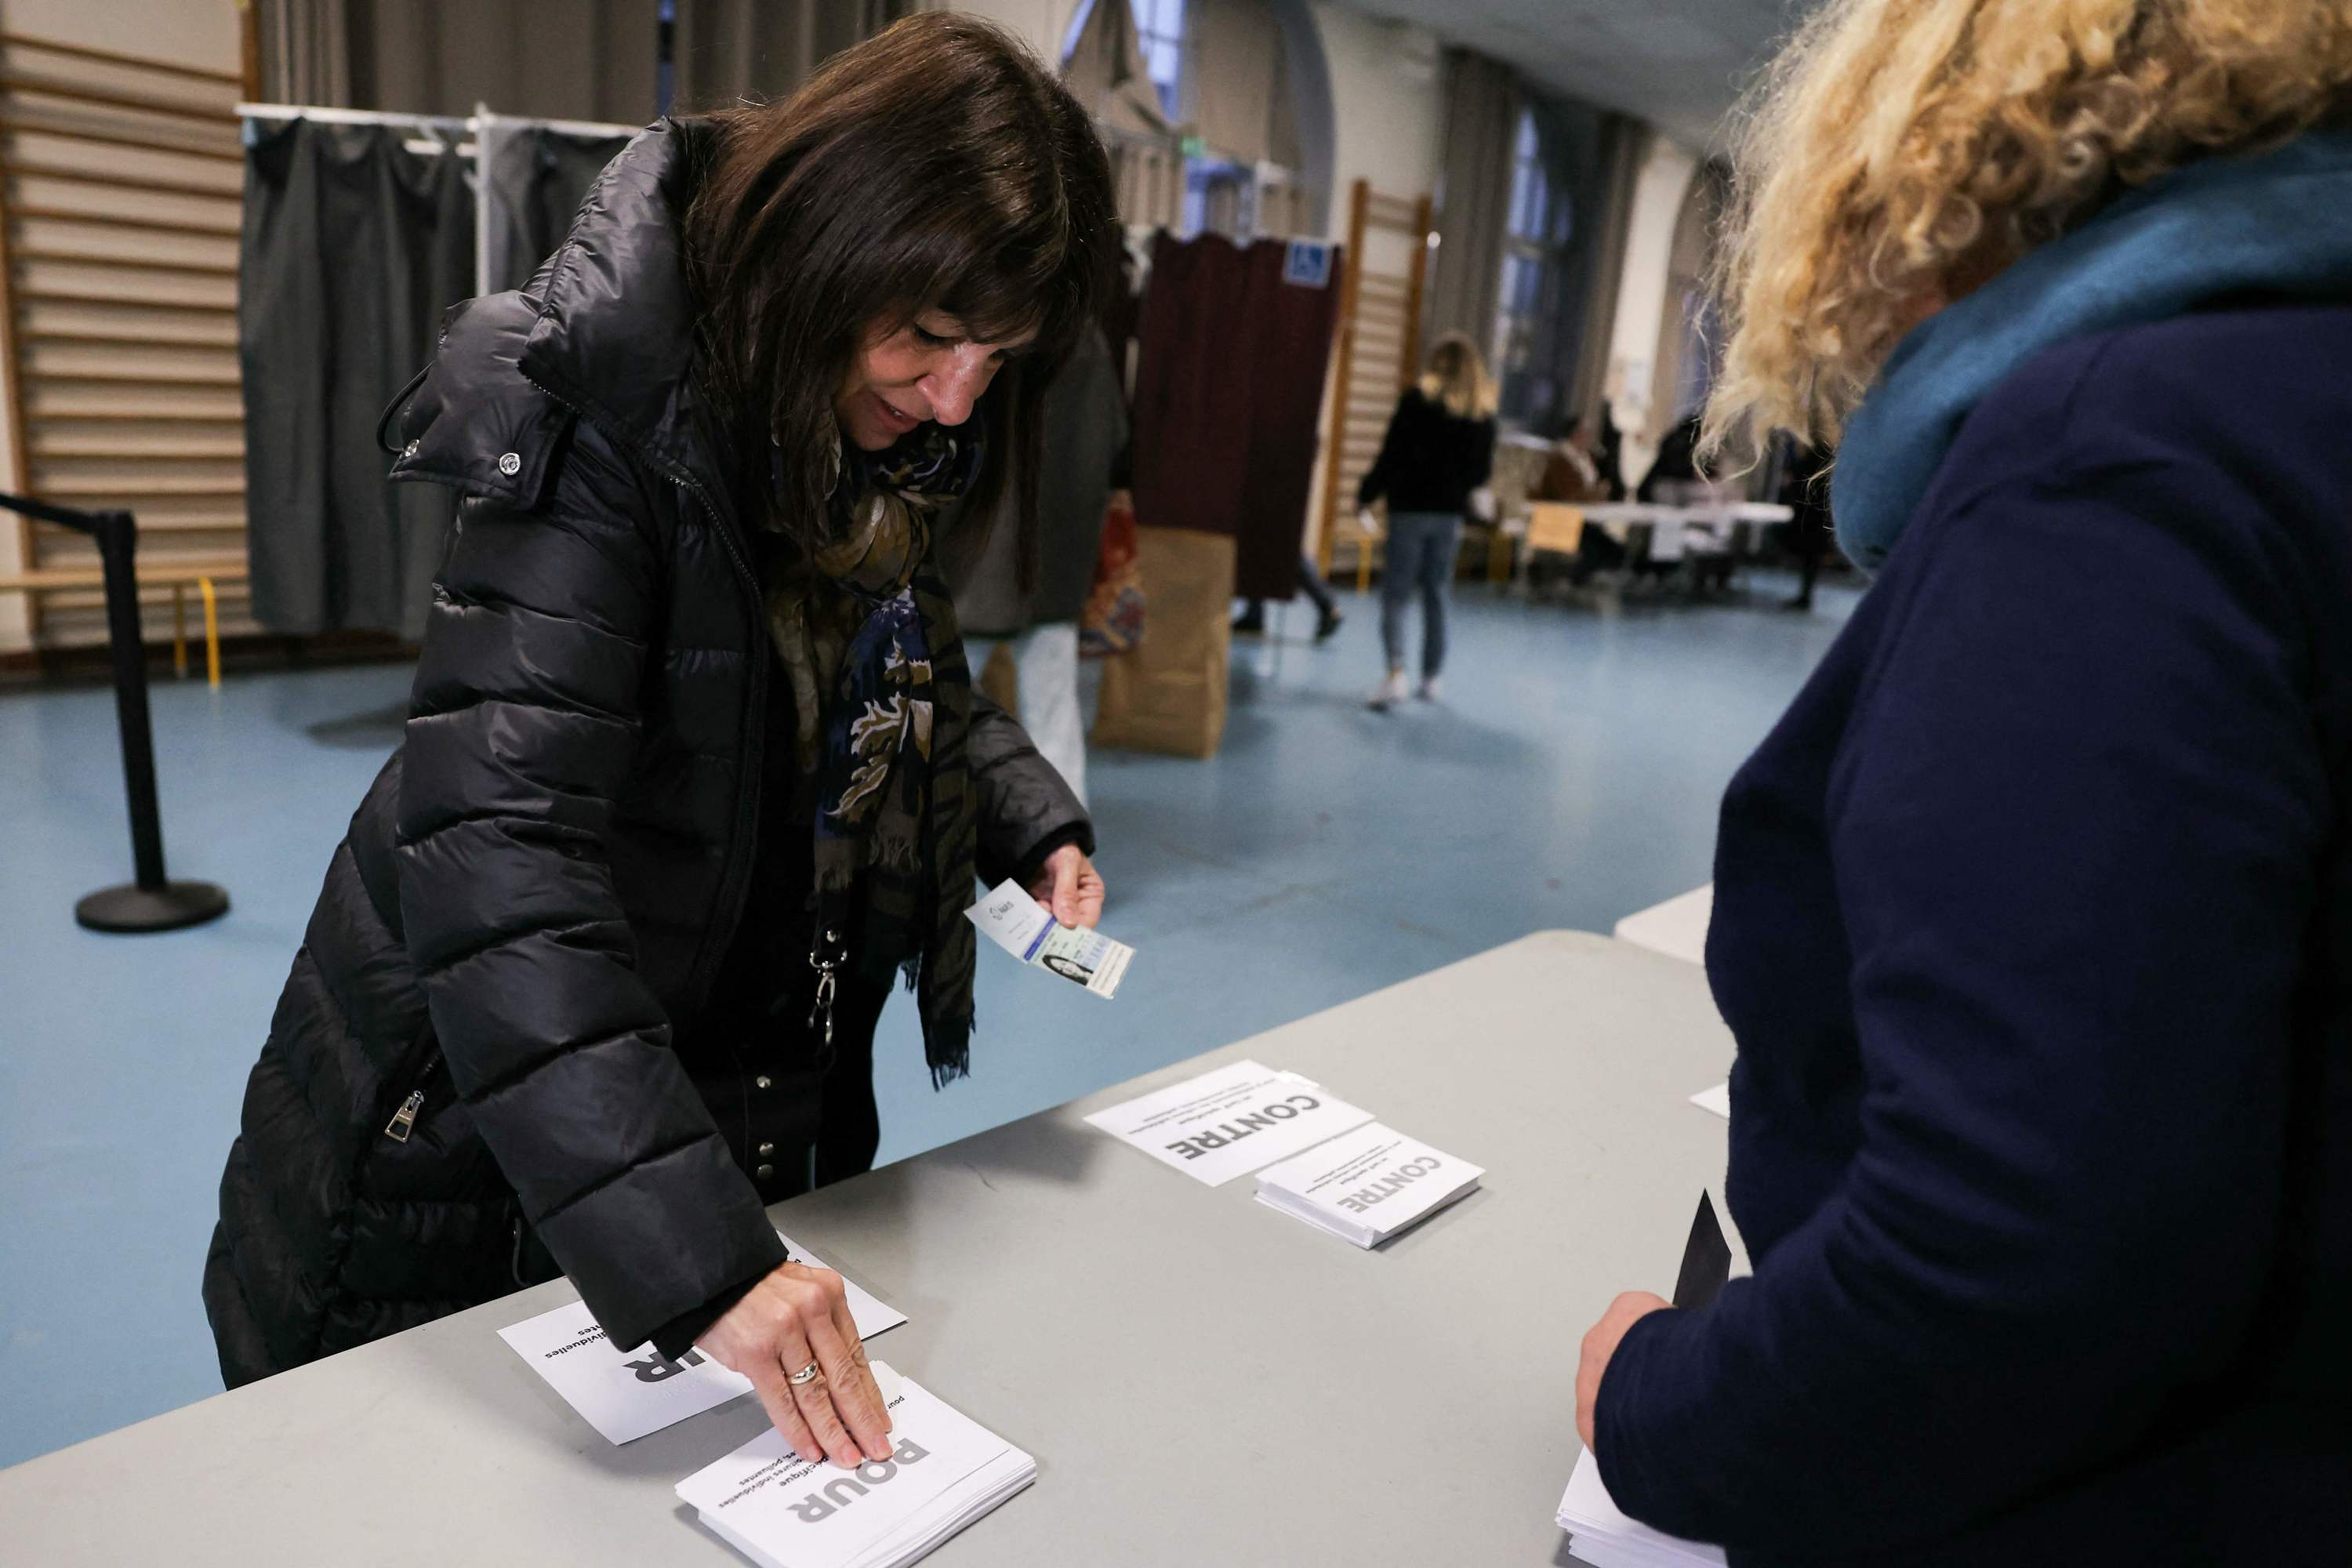 Anne Hidalgo's anti-SUV vote cost 400,000 euros, or more than 5 euros per mobilized voter